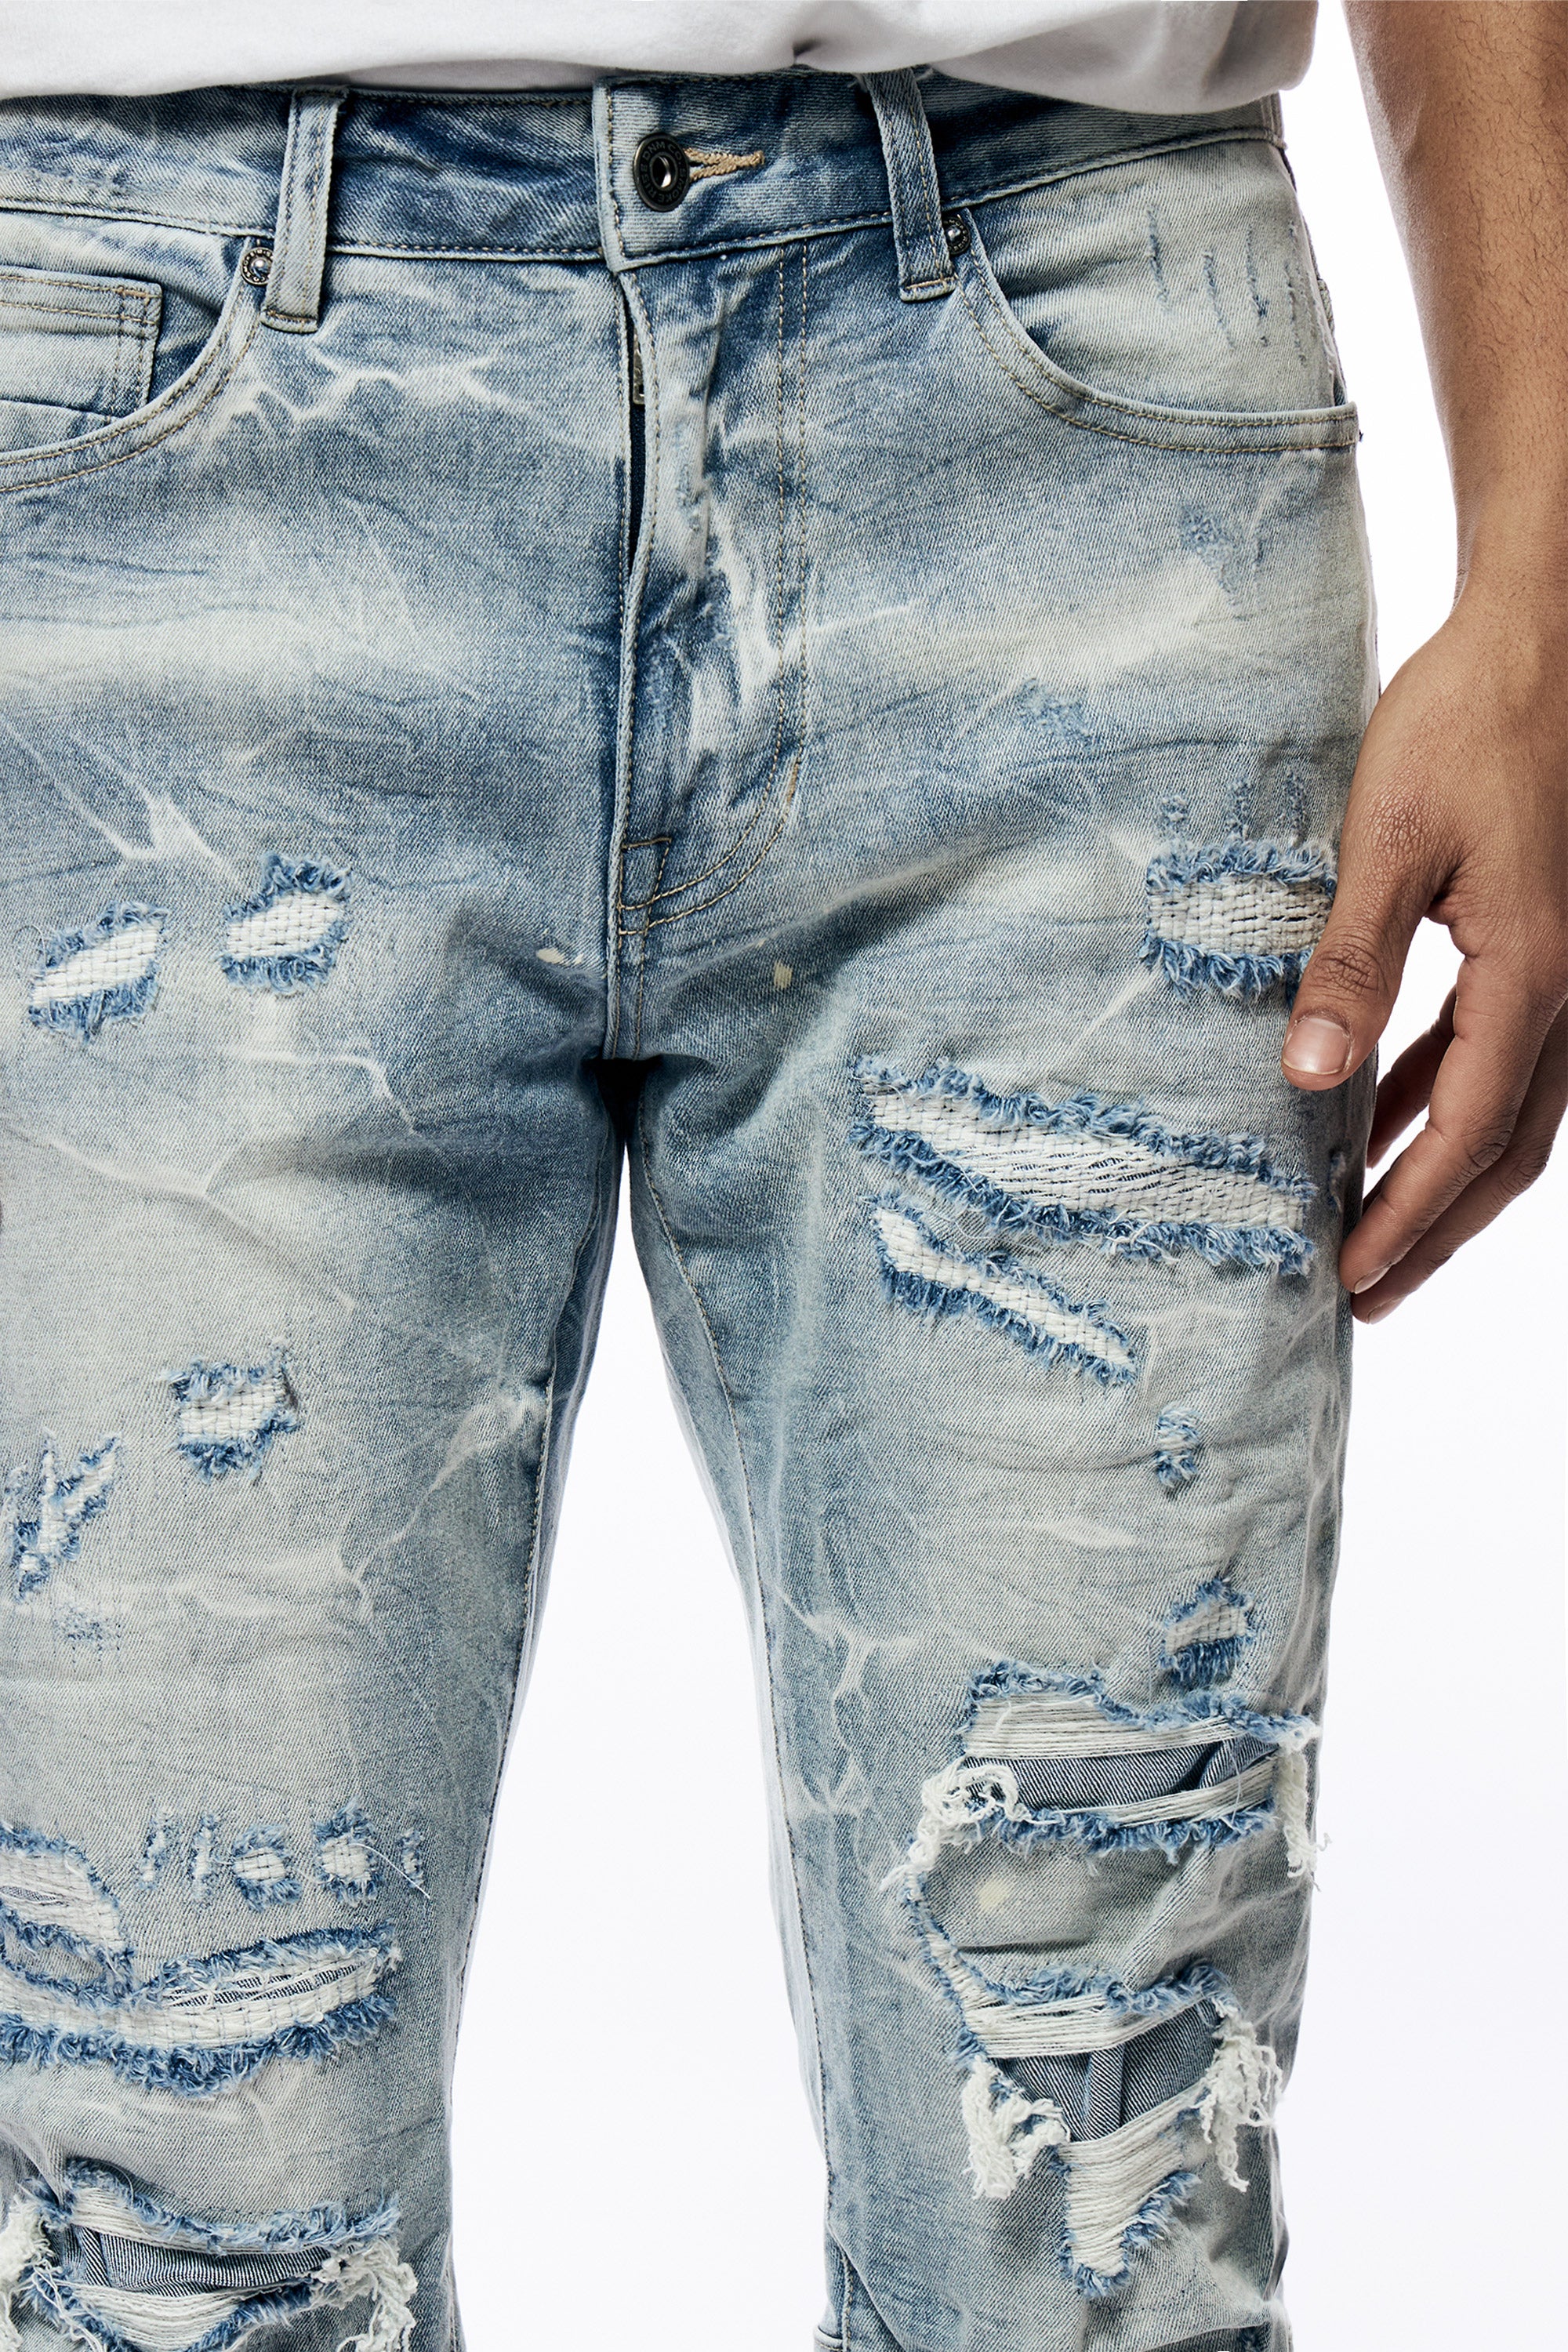 Rip & Repaired Lightning Washed Denim Jeans